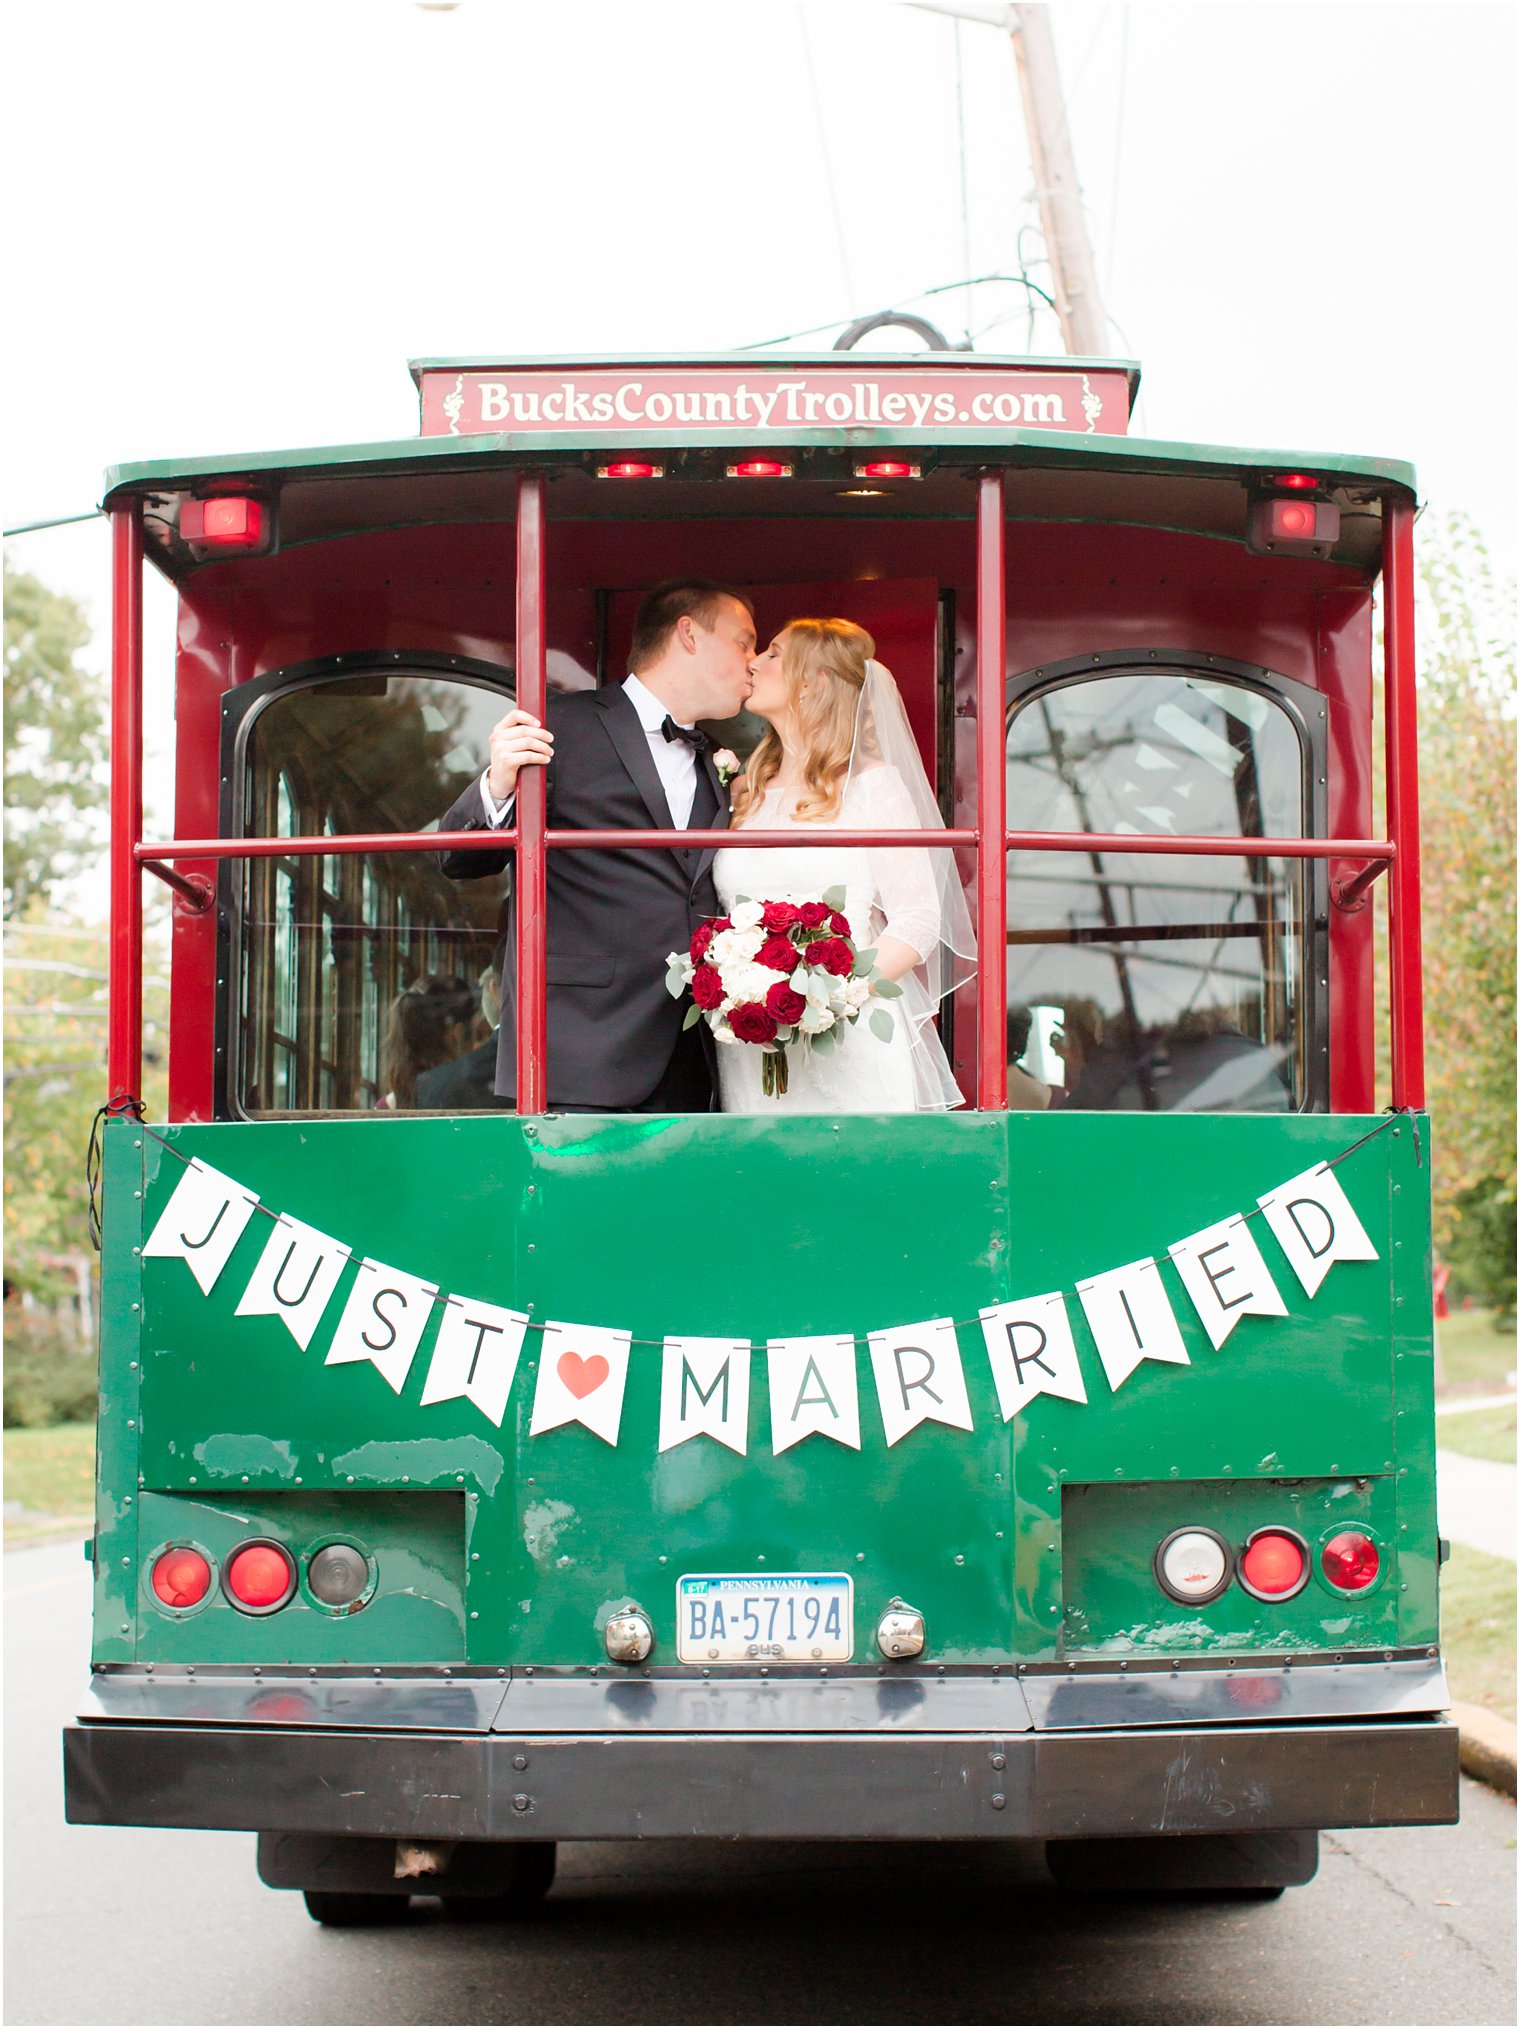 Bride and groom in Bucks County Trolley with "Just Married" sign